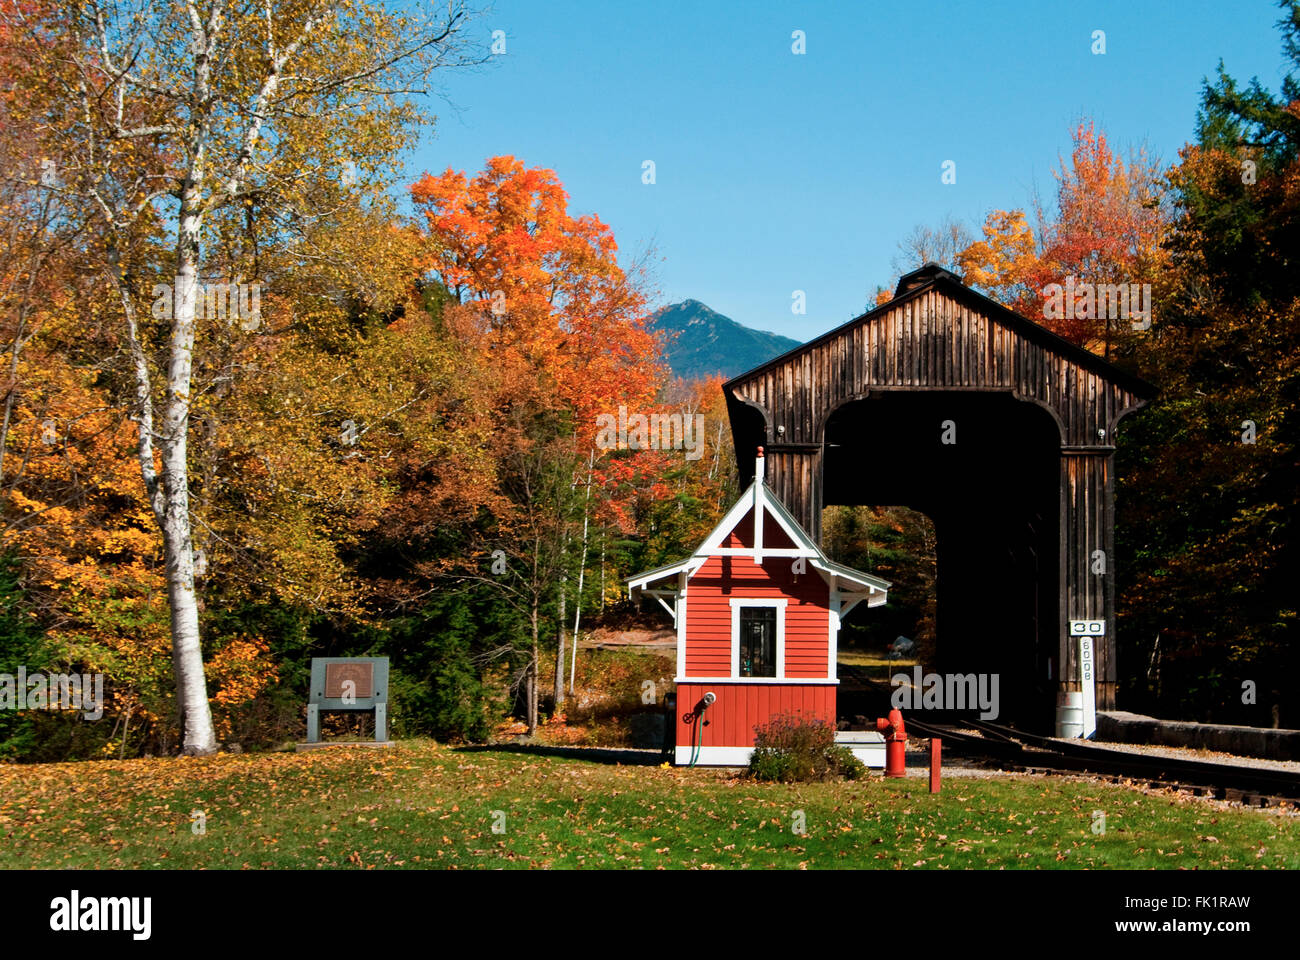 Clark's covered bridge lies on a railroad track crossing a river on an autumn day with vibrant foliage in the White Mountains of New Hampshire. Stock Photo